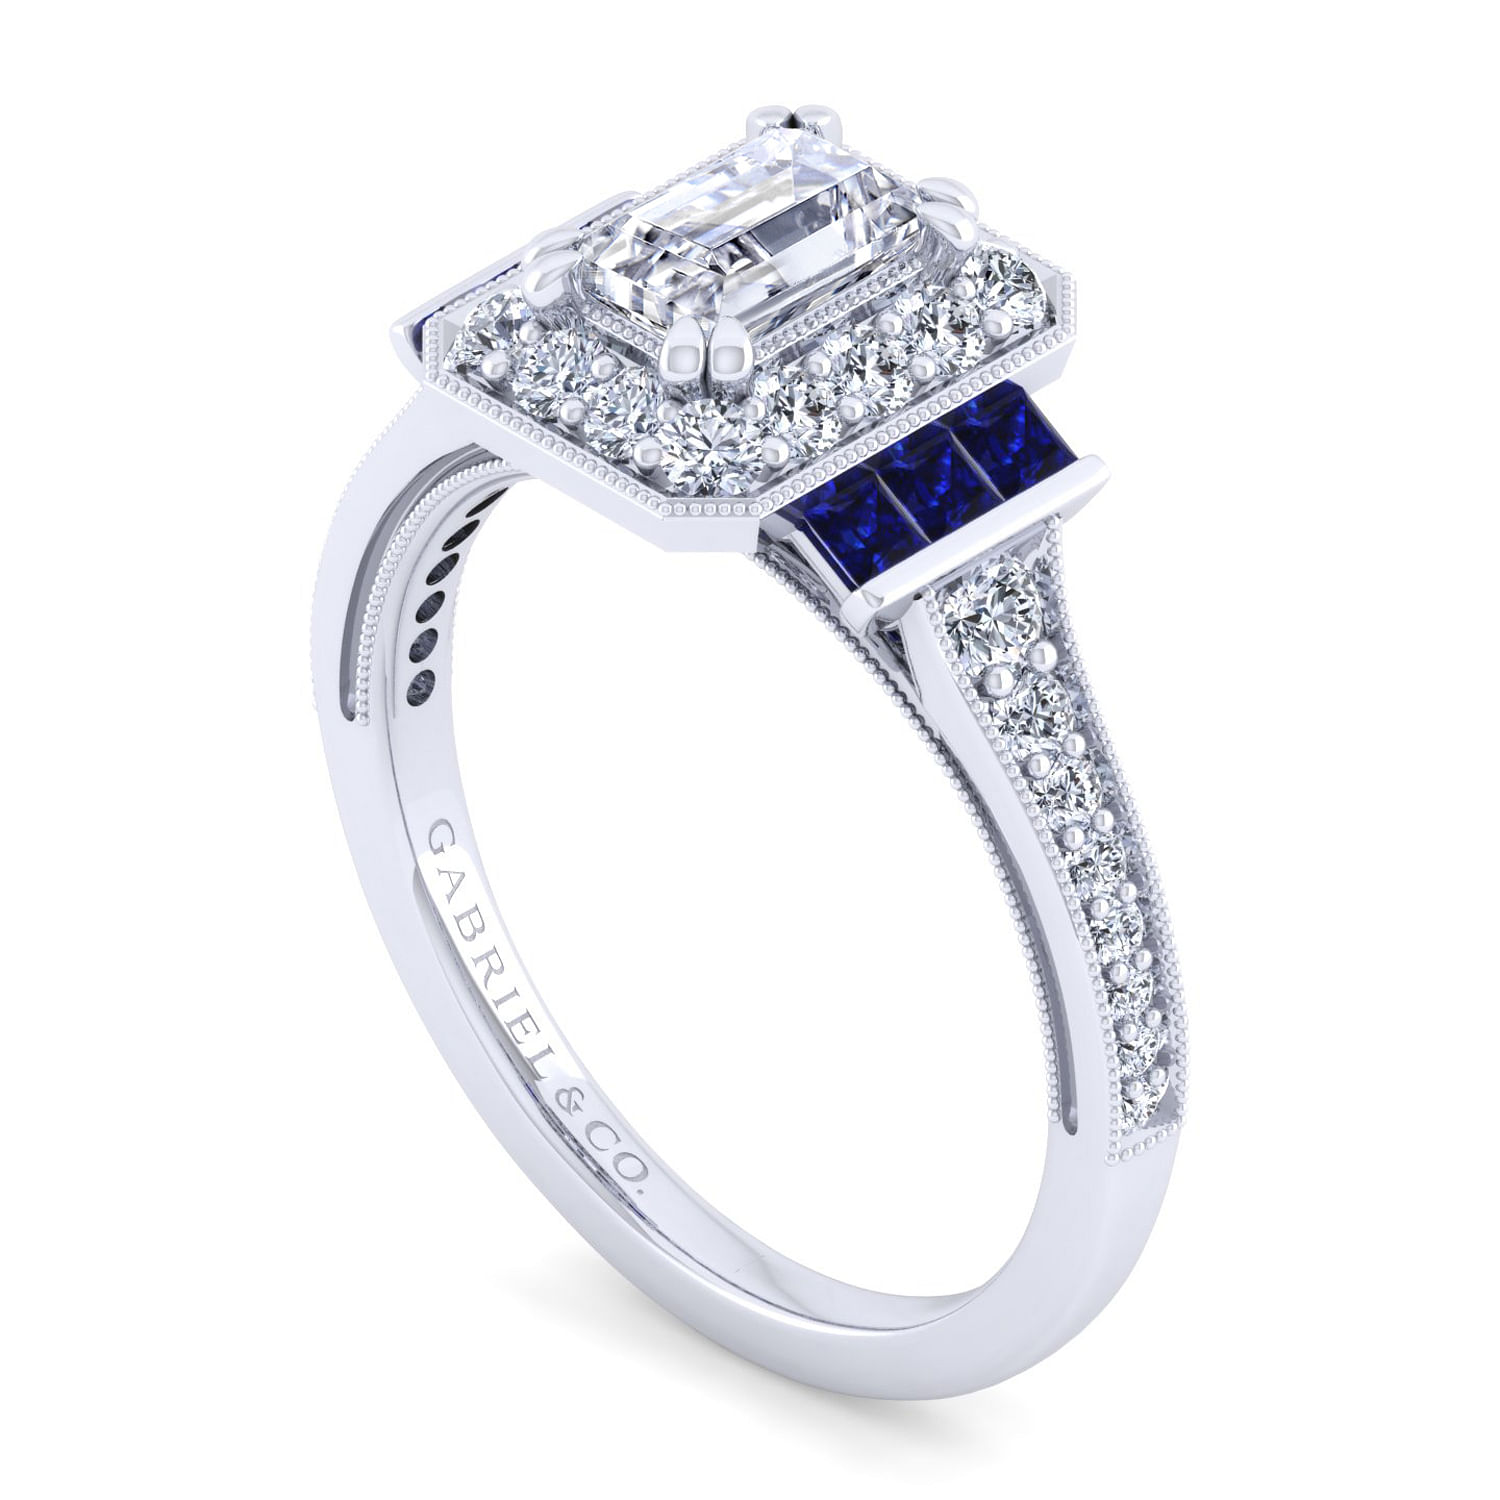 Vintage Inspired 14K White Gold Halo Emerald Cut Sapphire and Diamond Engagement Ring